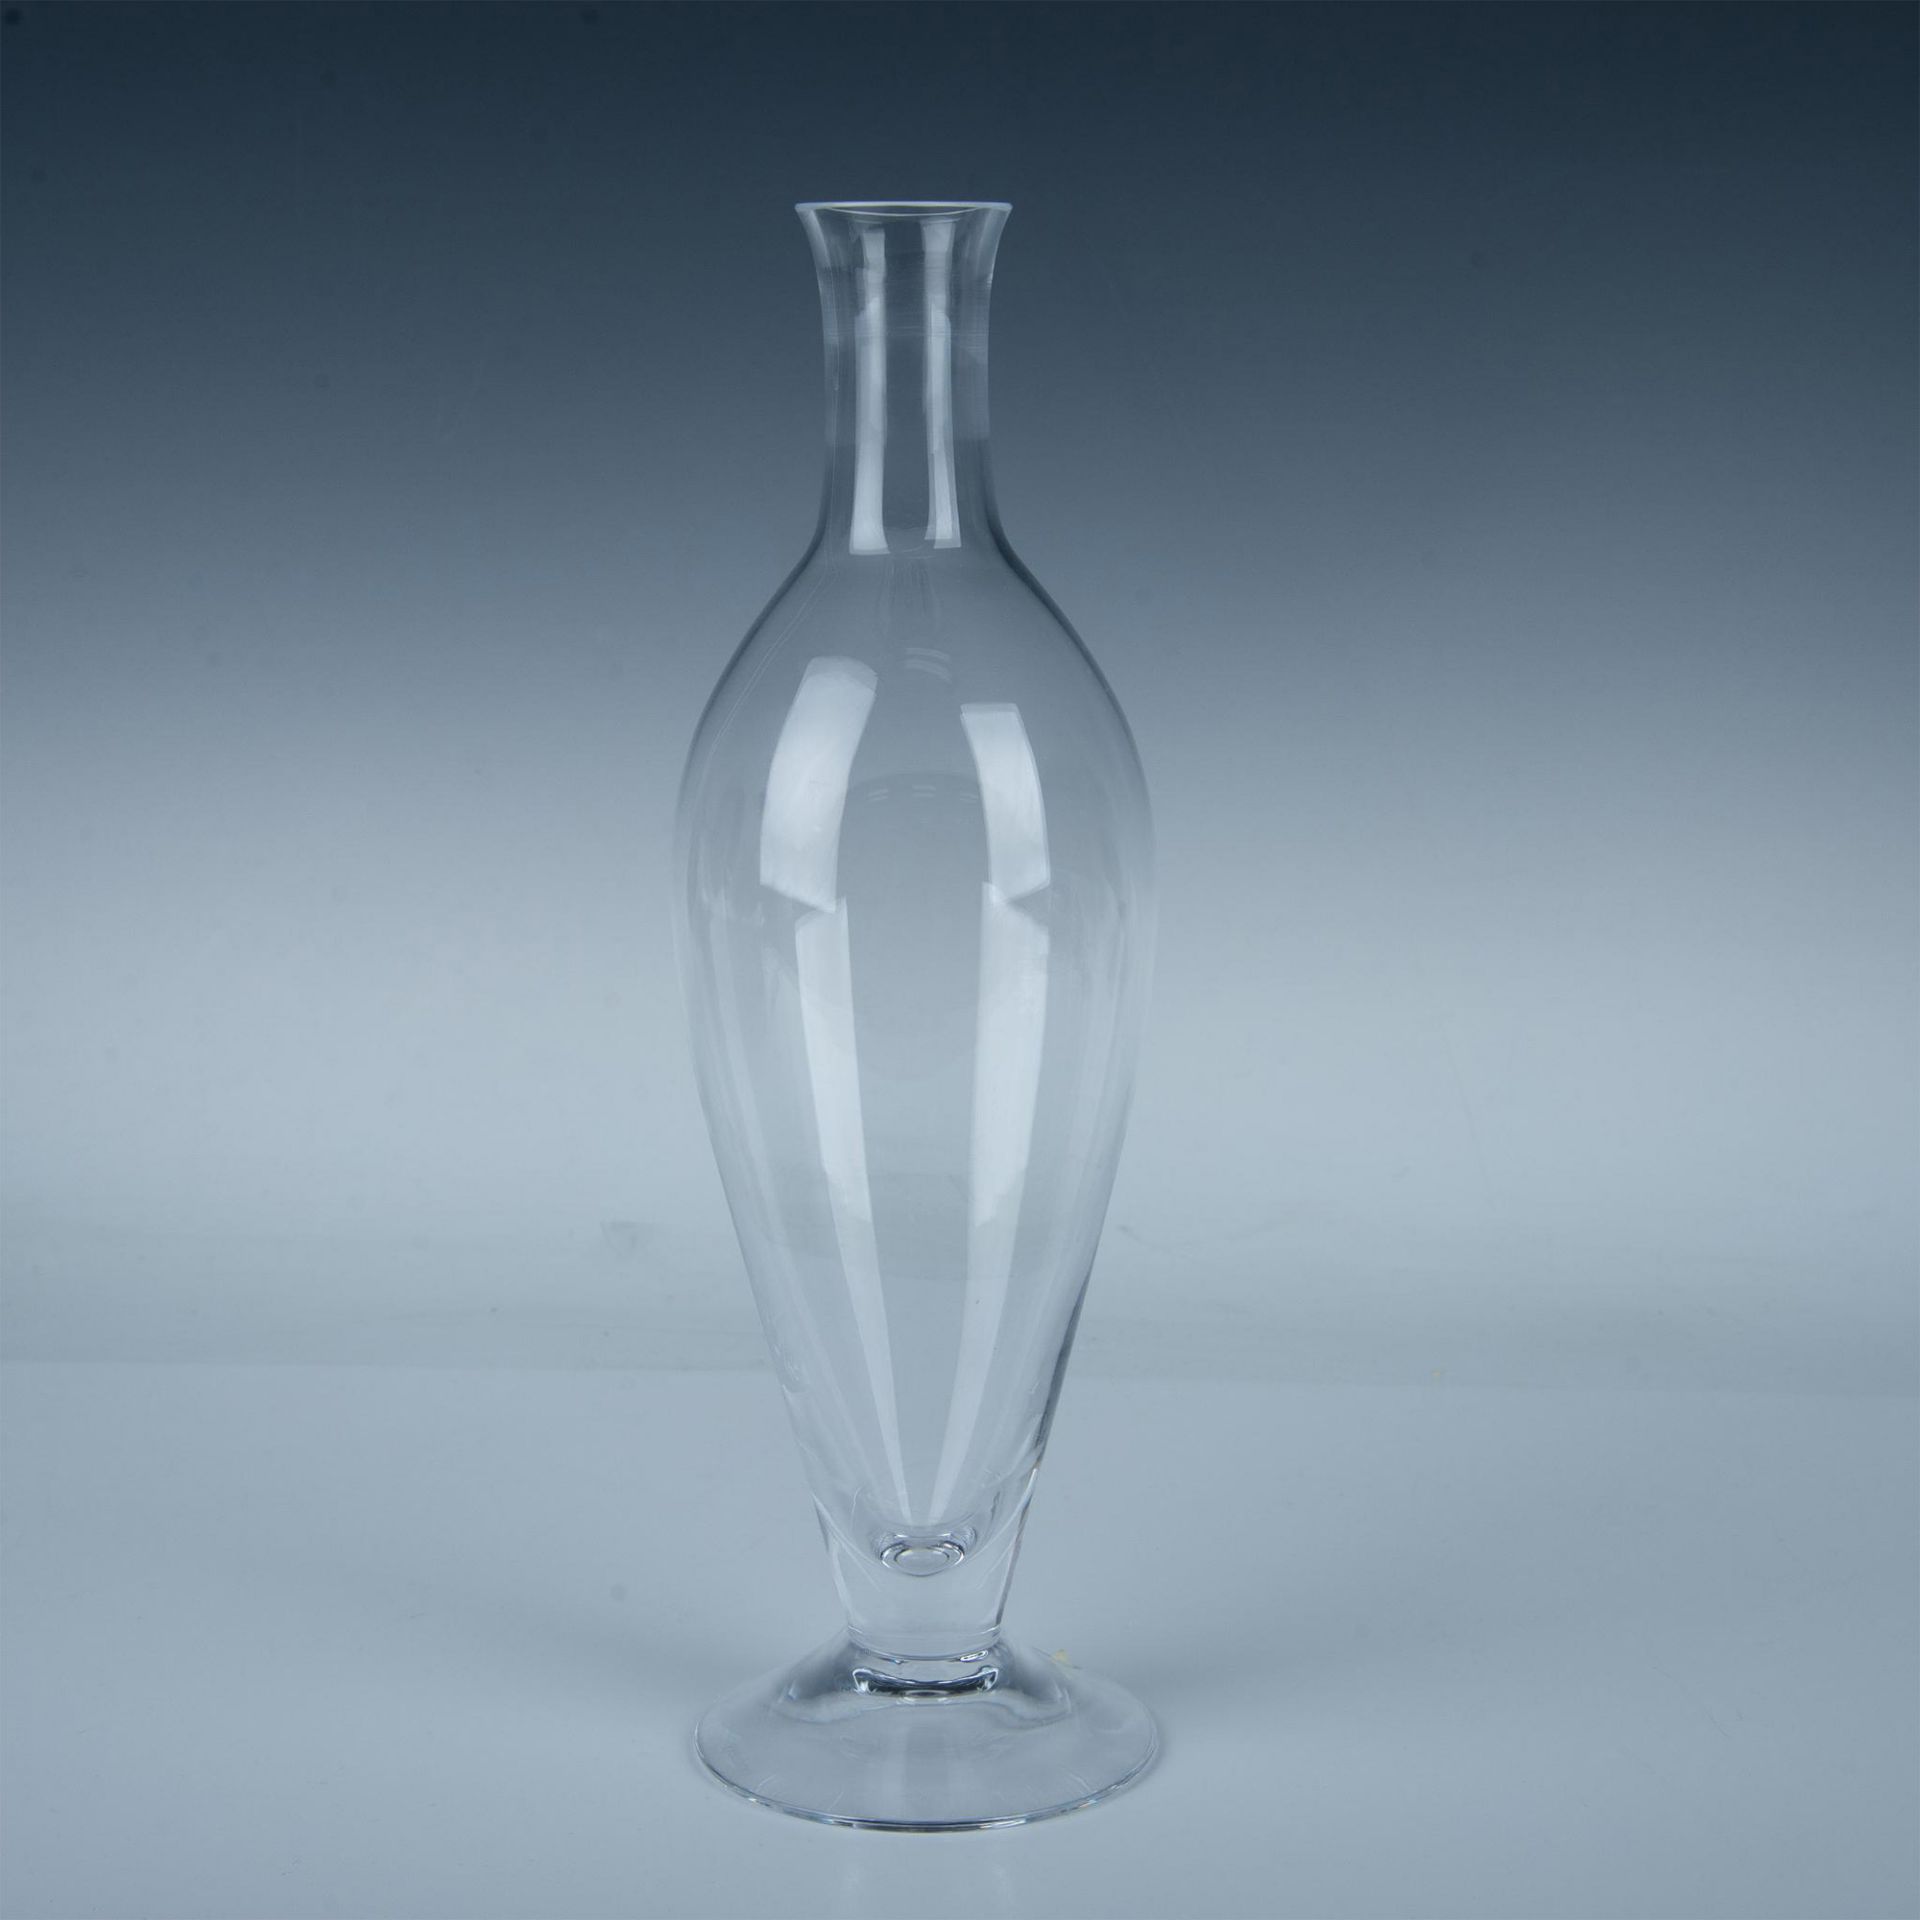 Orrefors Crystal Footed Decanter with Stopper